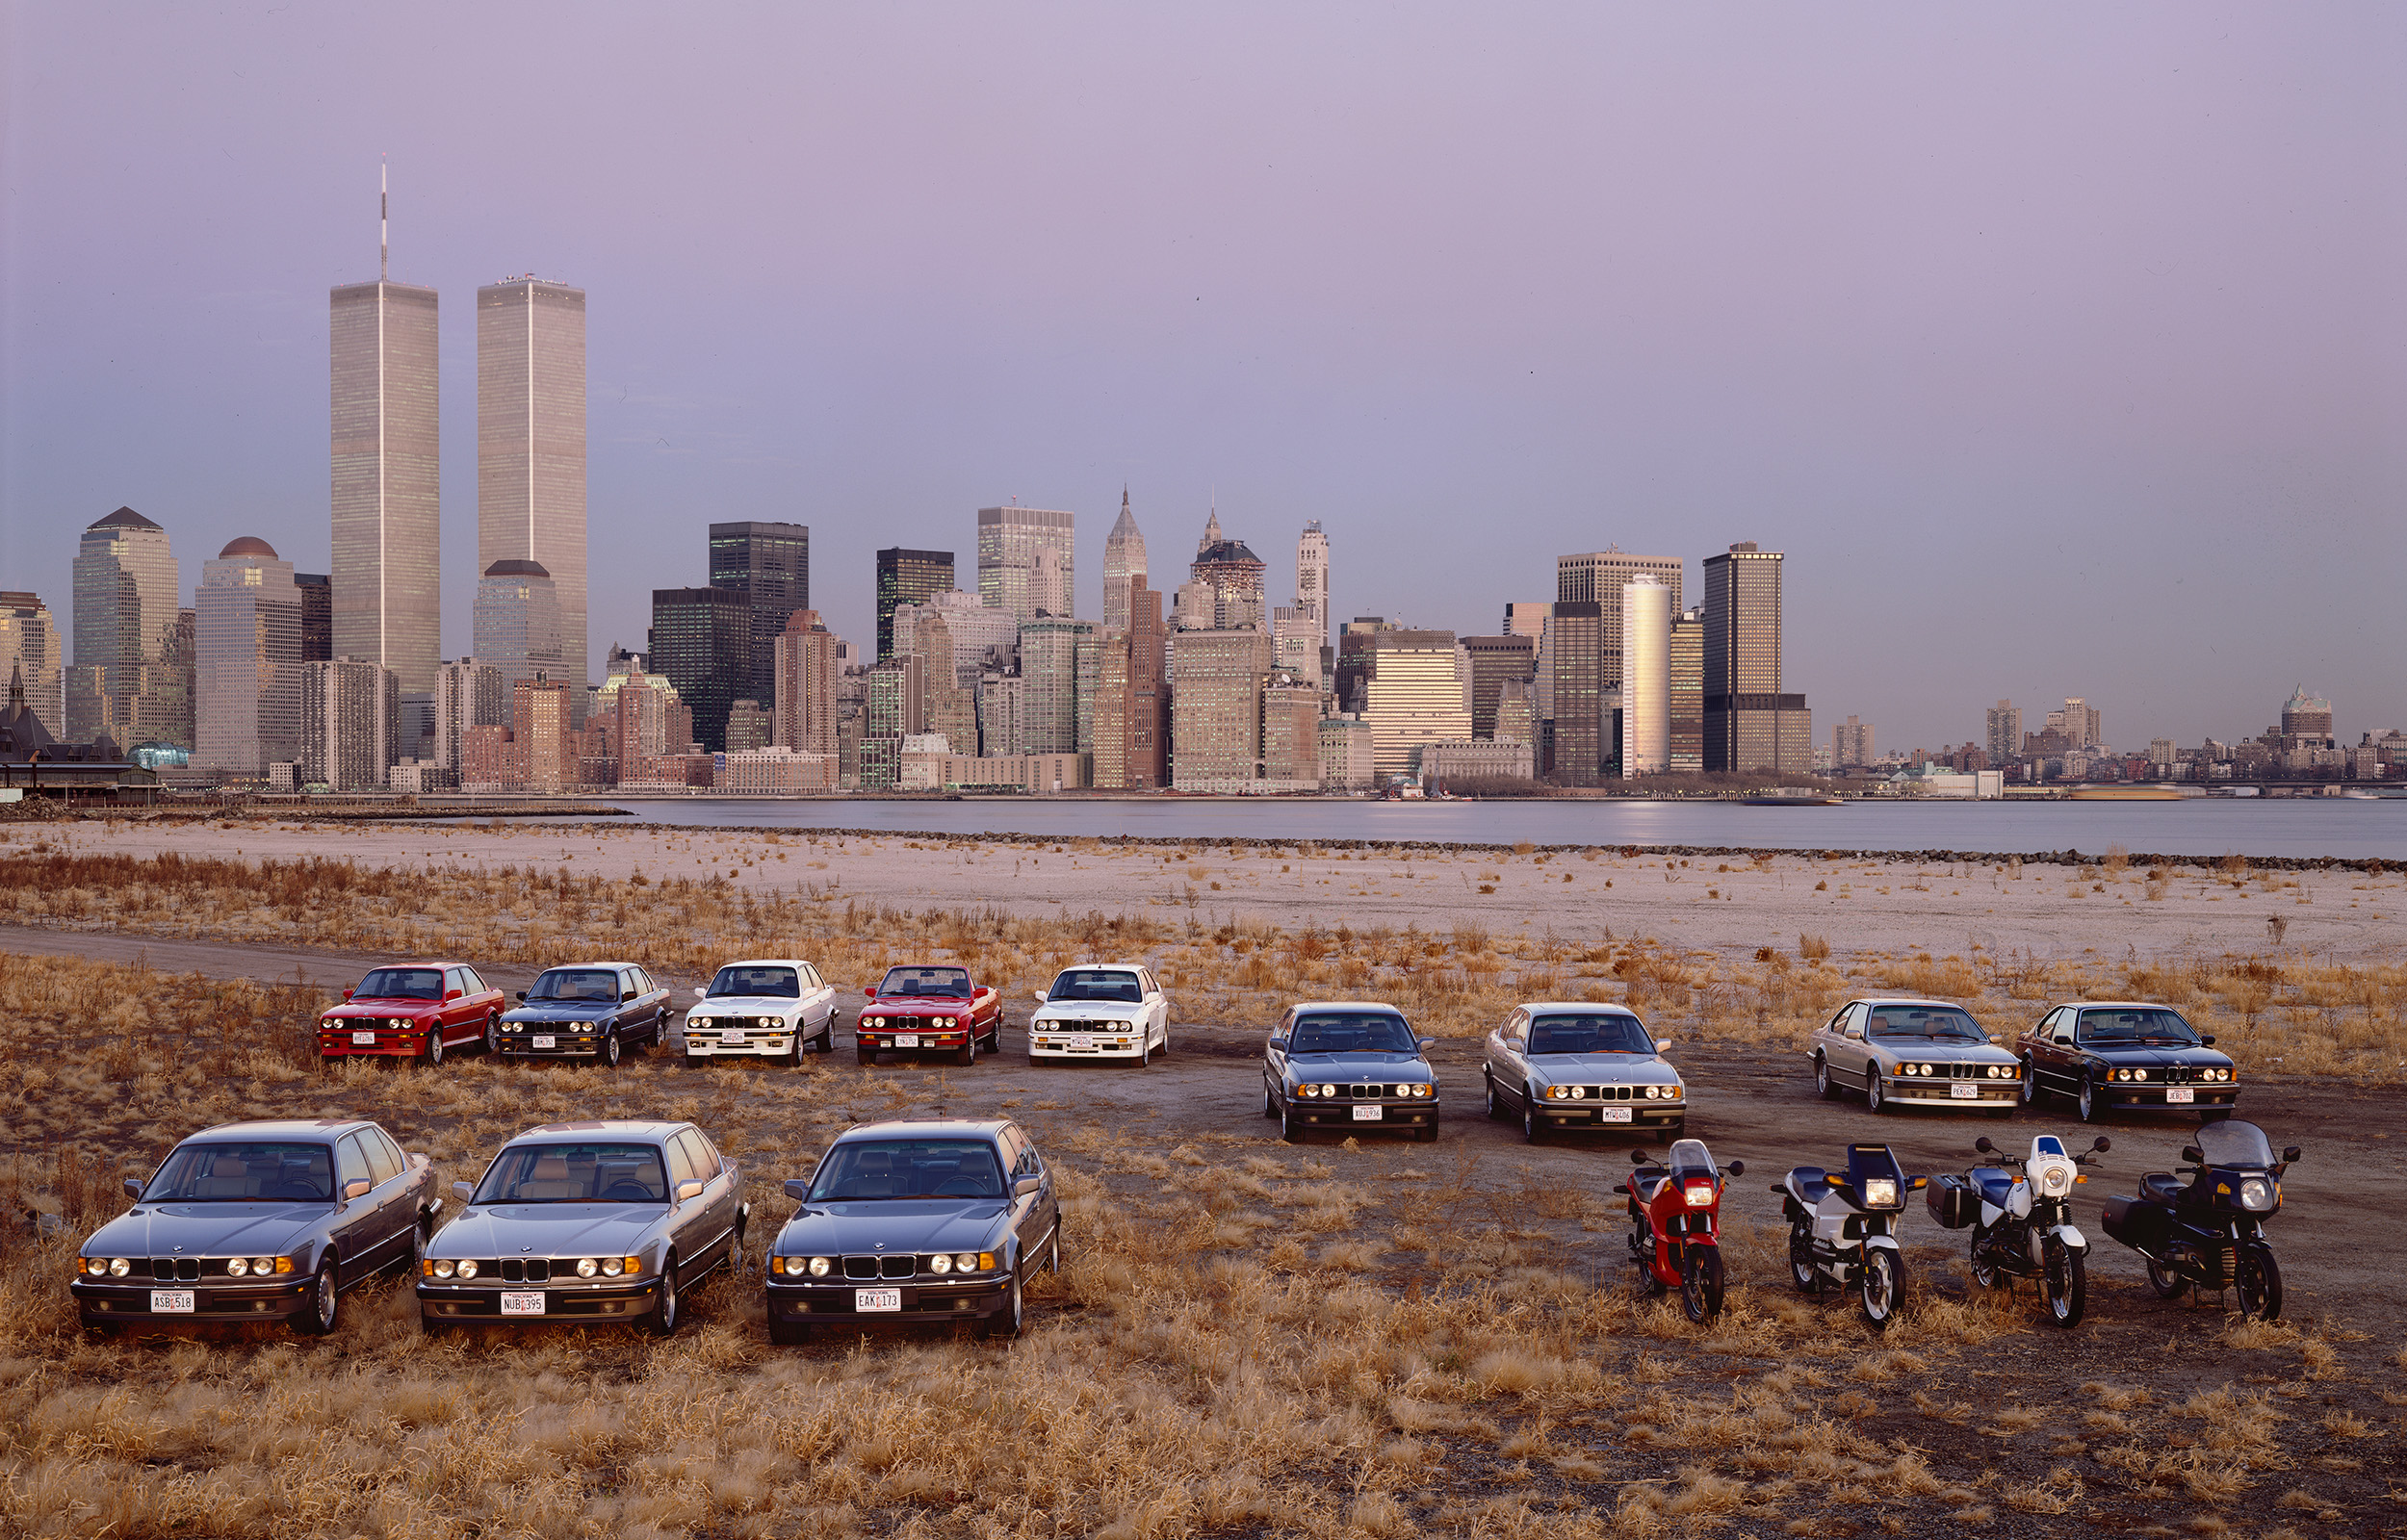  BMW Cars at NYC  BMW Annual Report 1990 